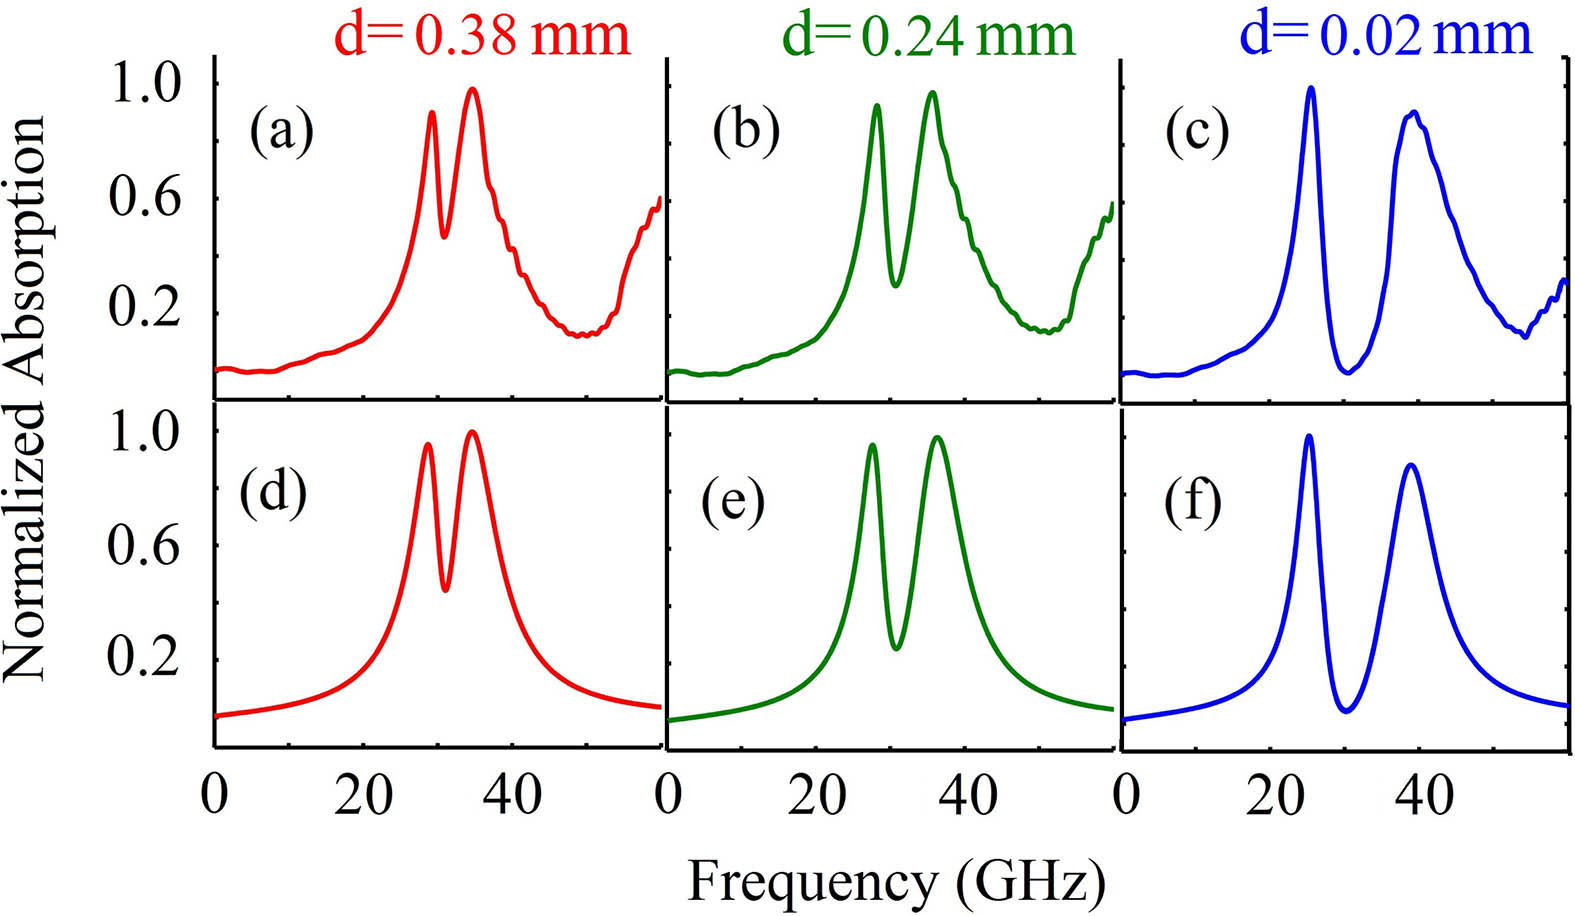 Numerical result of the normalized absorption spectrum of the linear PIT (Fig. 1) for (a) d=0.38, (b) d=0.24, and (c) d=0.02 mm, respectively. Analytical result given in (d), (e), and (f) is obtained from solving the model Eqs. (1) and (3) in the linear regime. Adapted from Ref. [64].